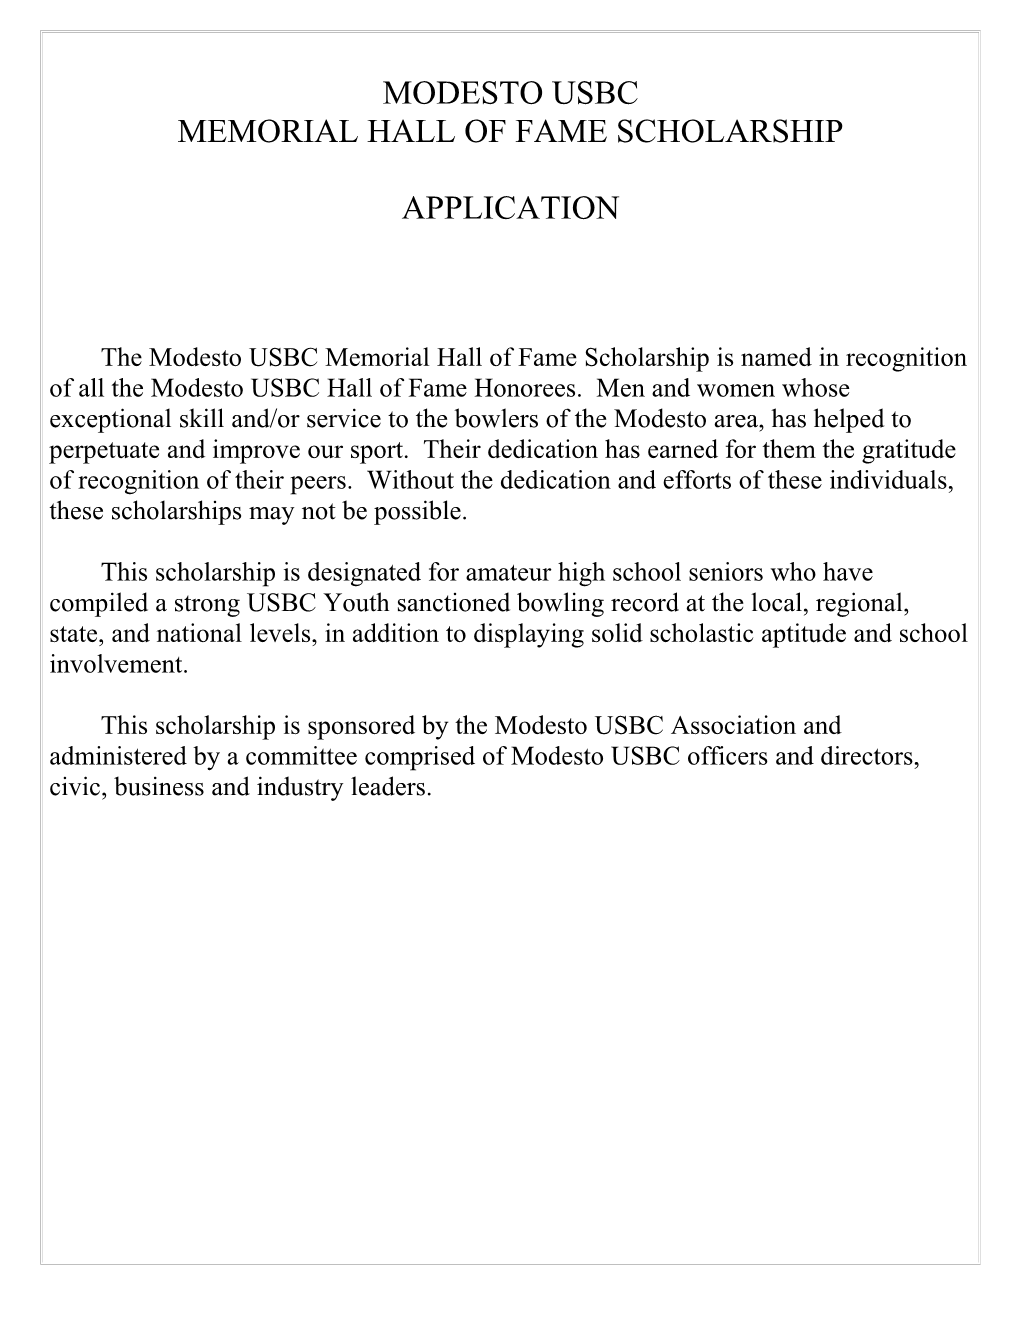 Memorial Hall of Fame Scholarship